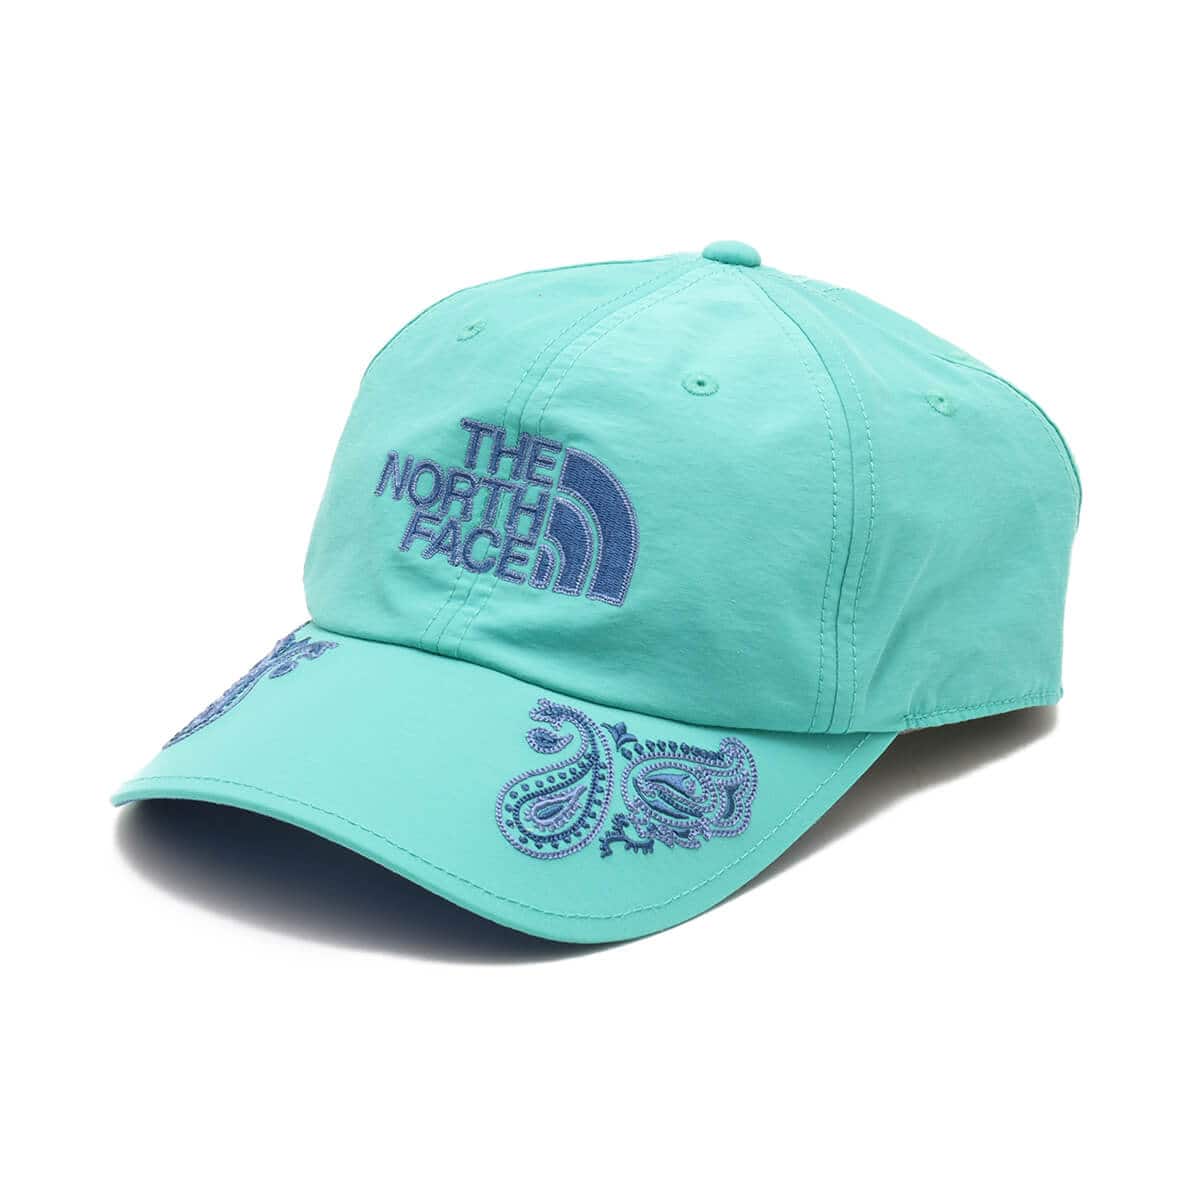 THE NORTH FACE PURPLE LABEL Field Embroidered Graphic Cap Jade Green